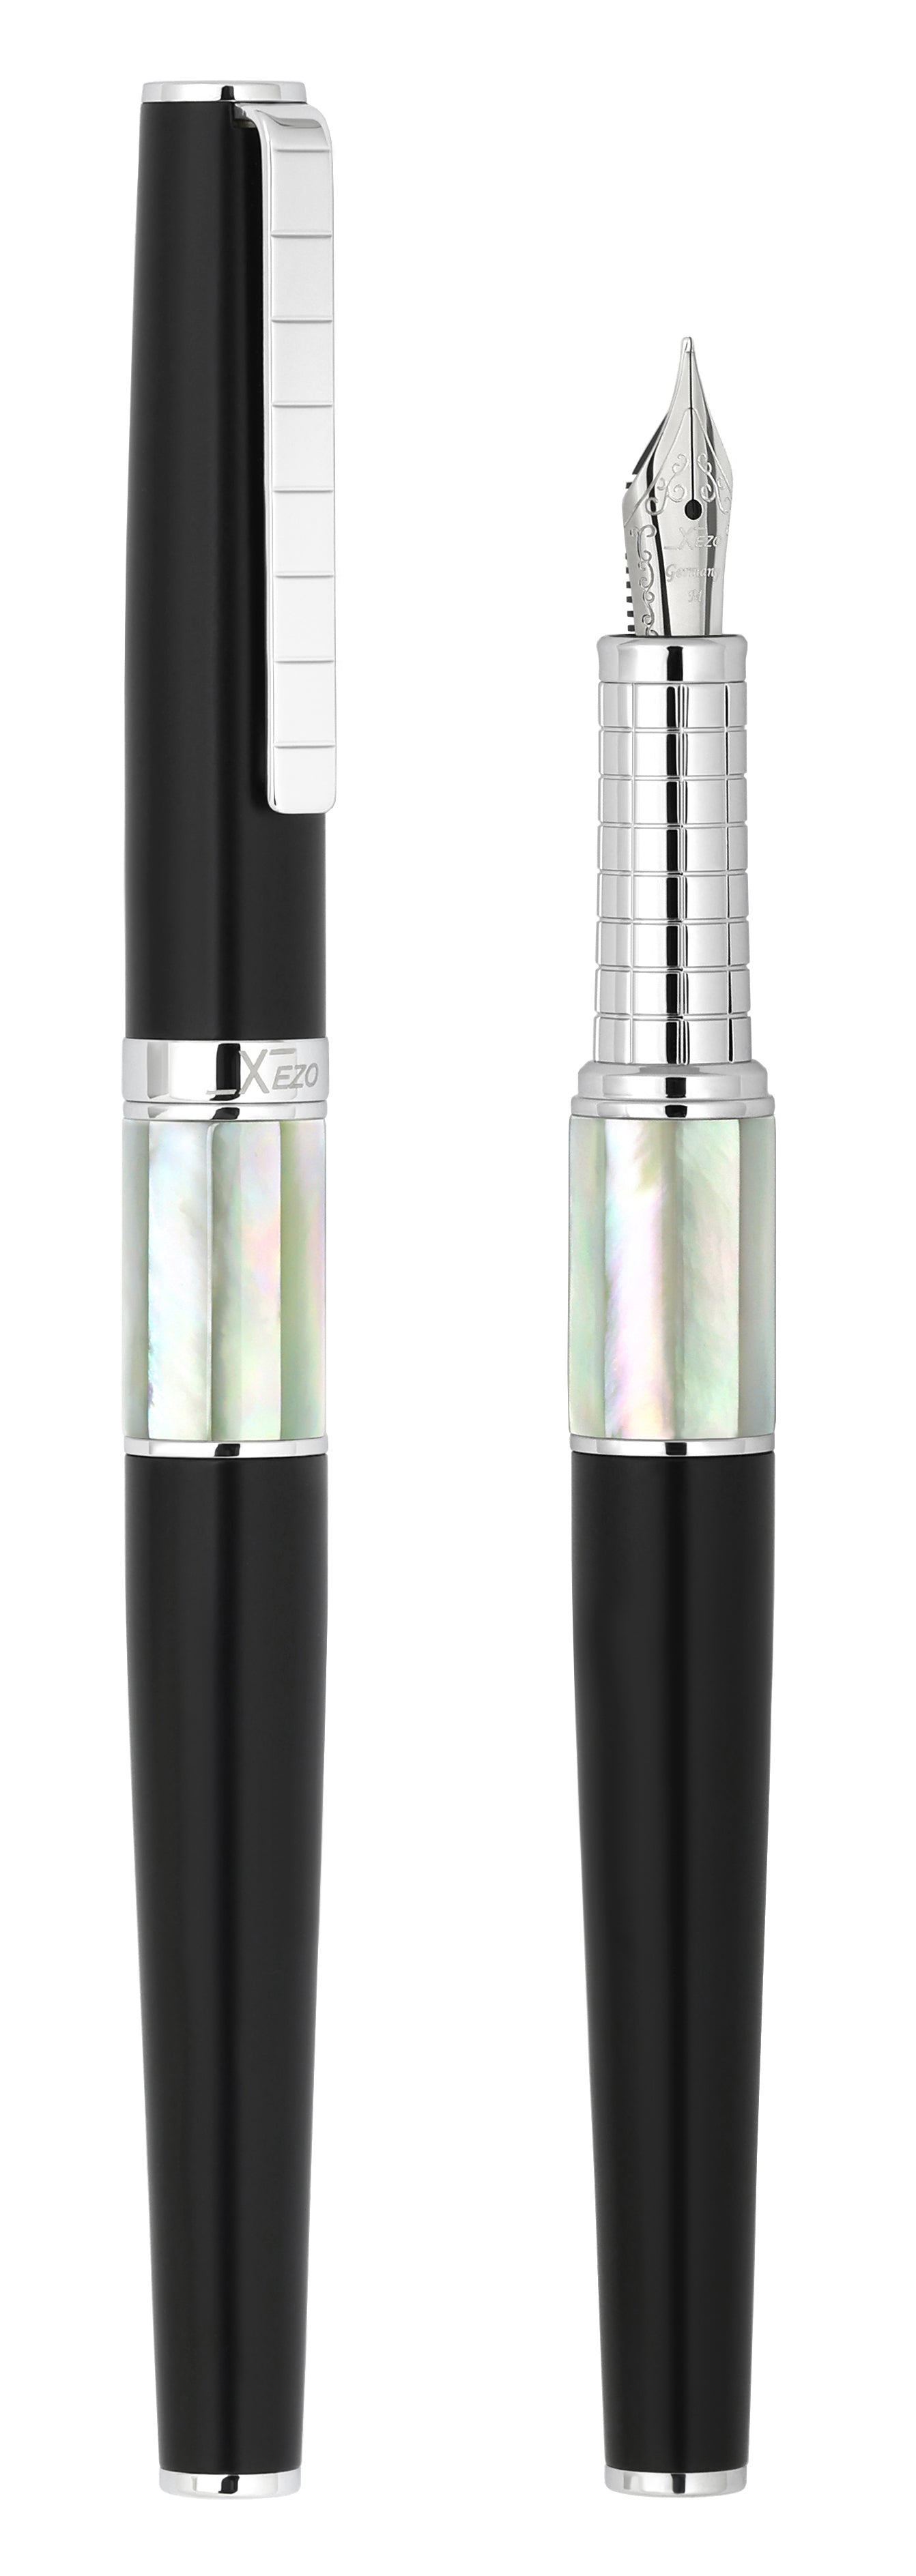 Xezo - Vertical view of two Speed Master Black FM-WC Fountain pens; the one on the left is capped, and the one on the right is uncapped